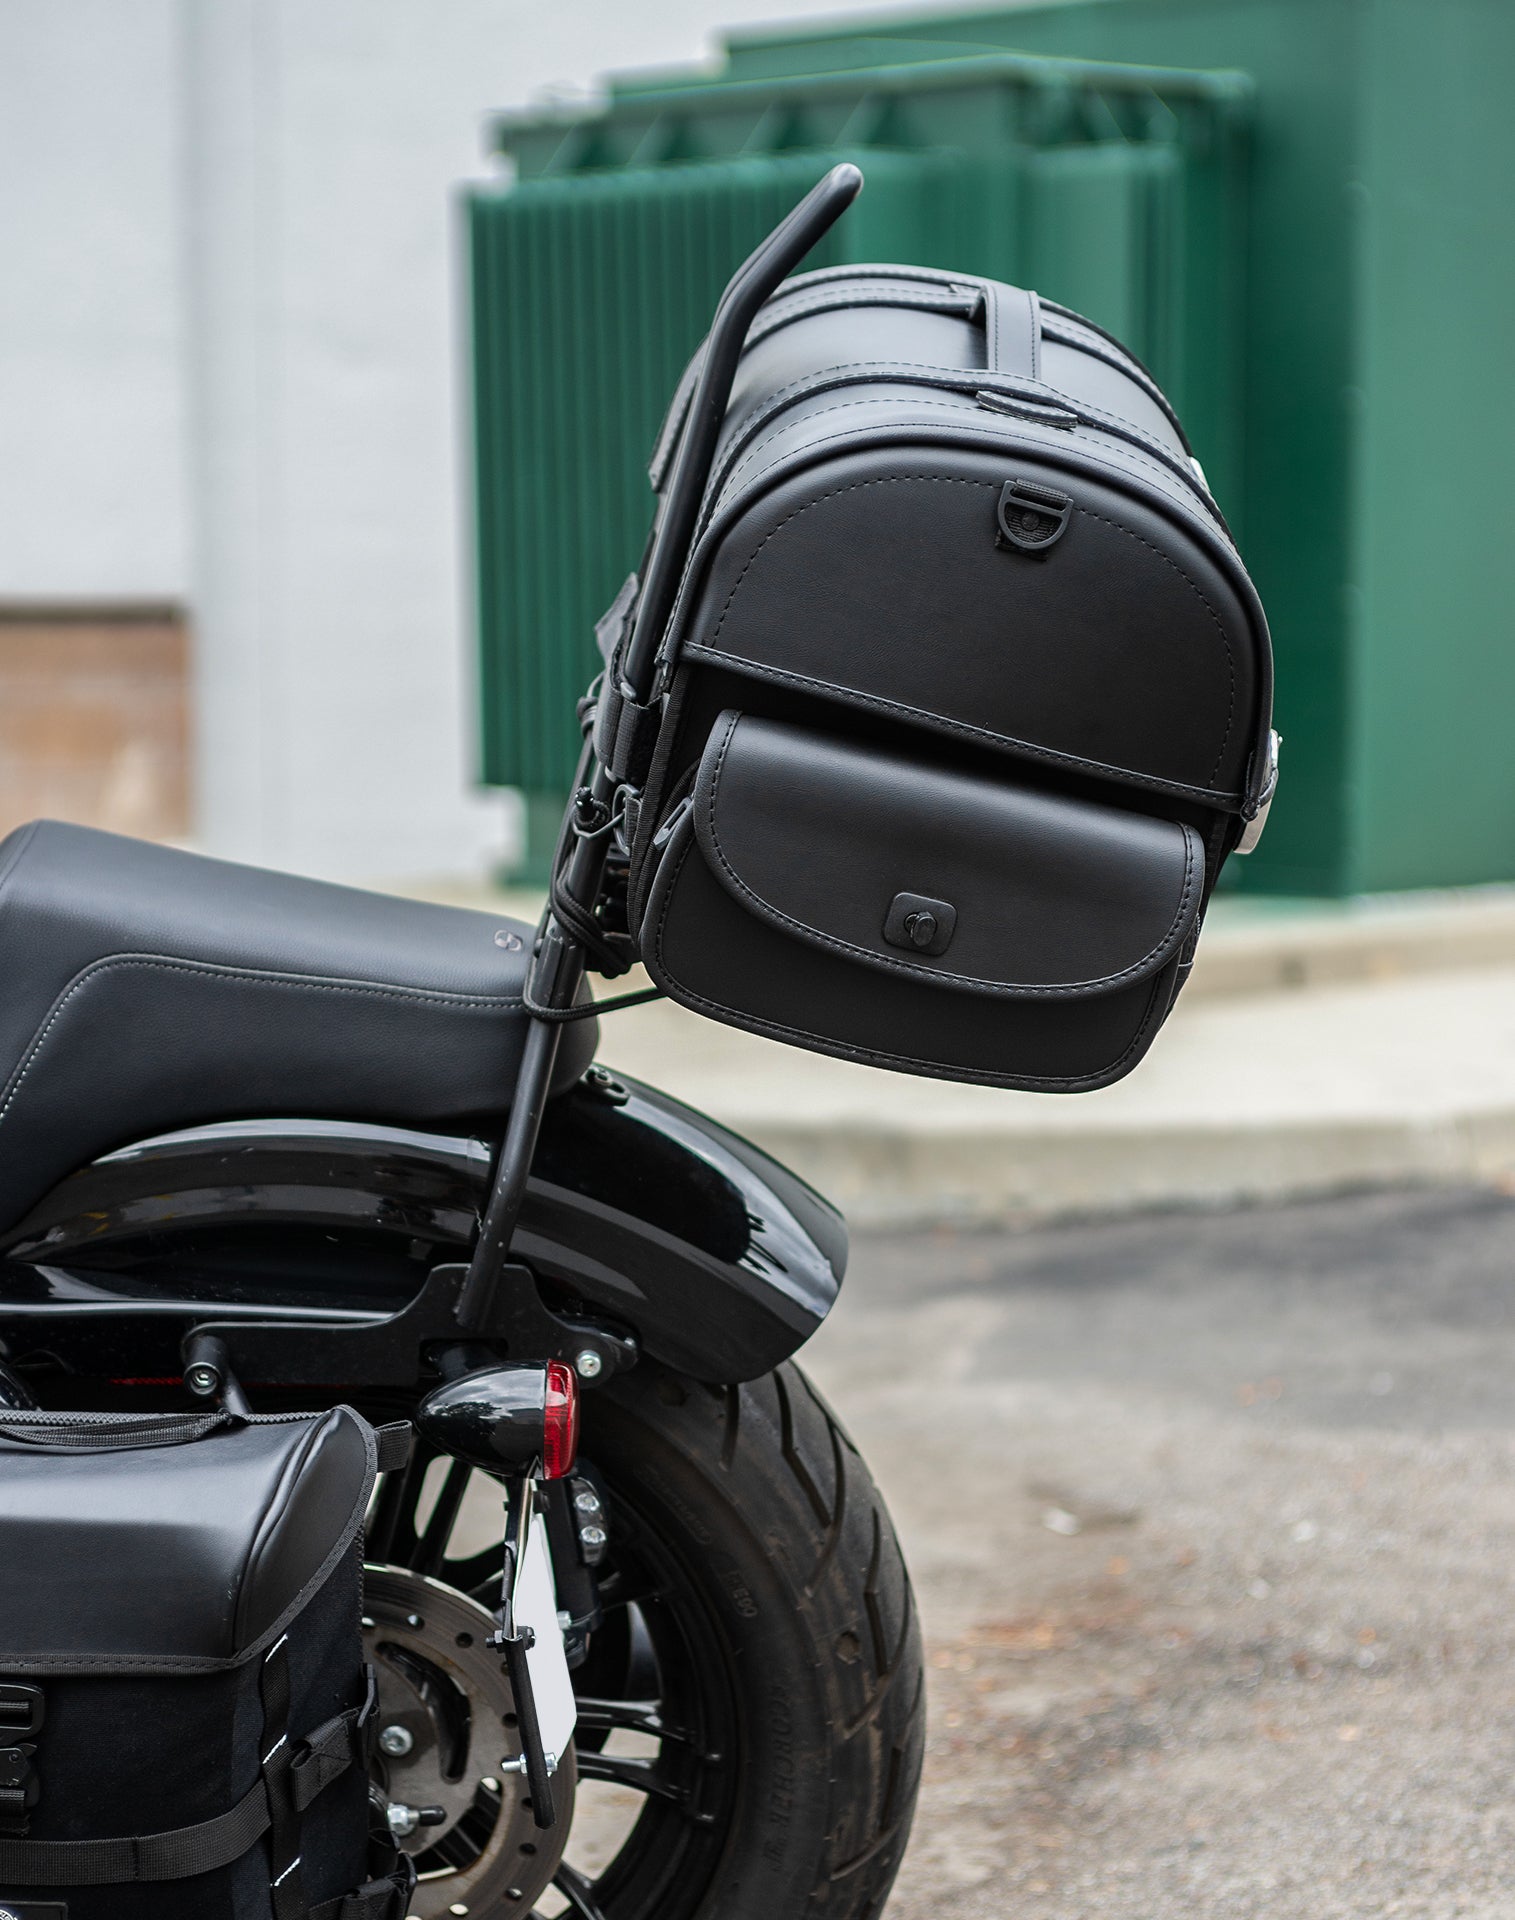 18L - Century Medium Hysoung Leather Motorcycle Tail Bag